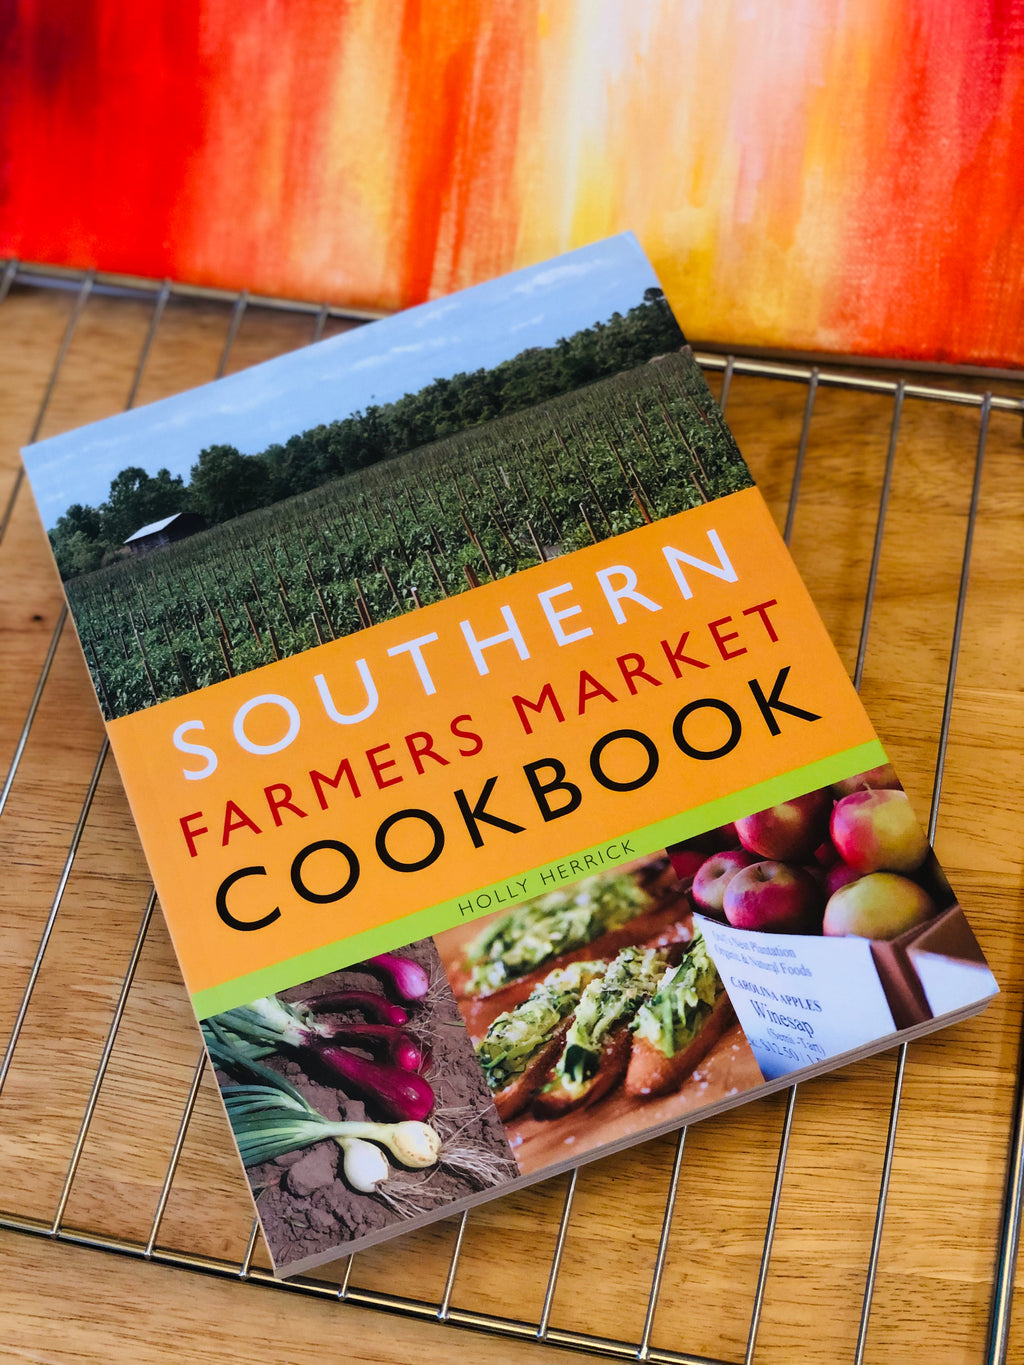 Southern Farmers Market Cookbook- By Holly Herrick